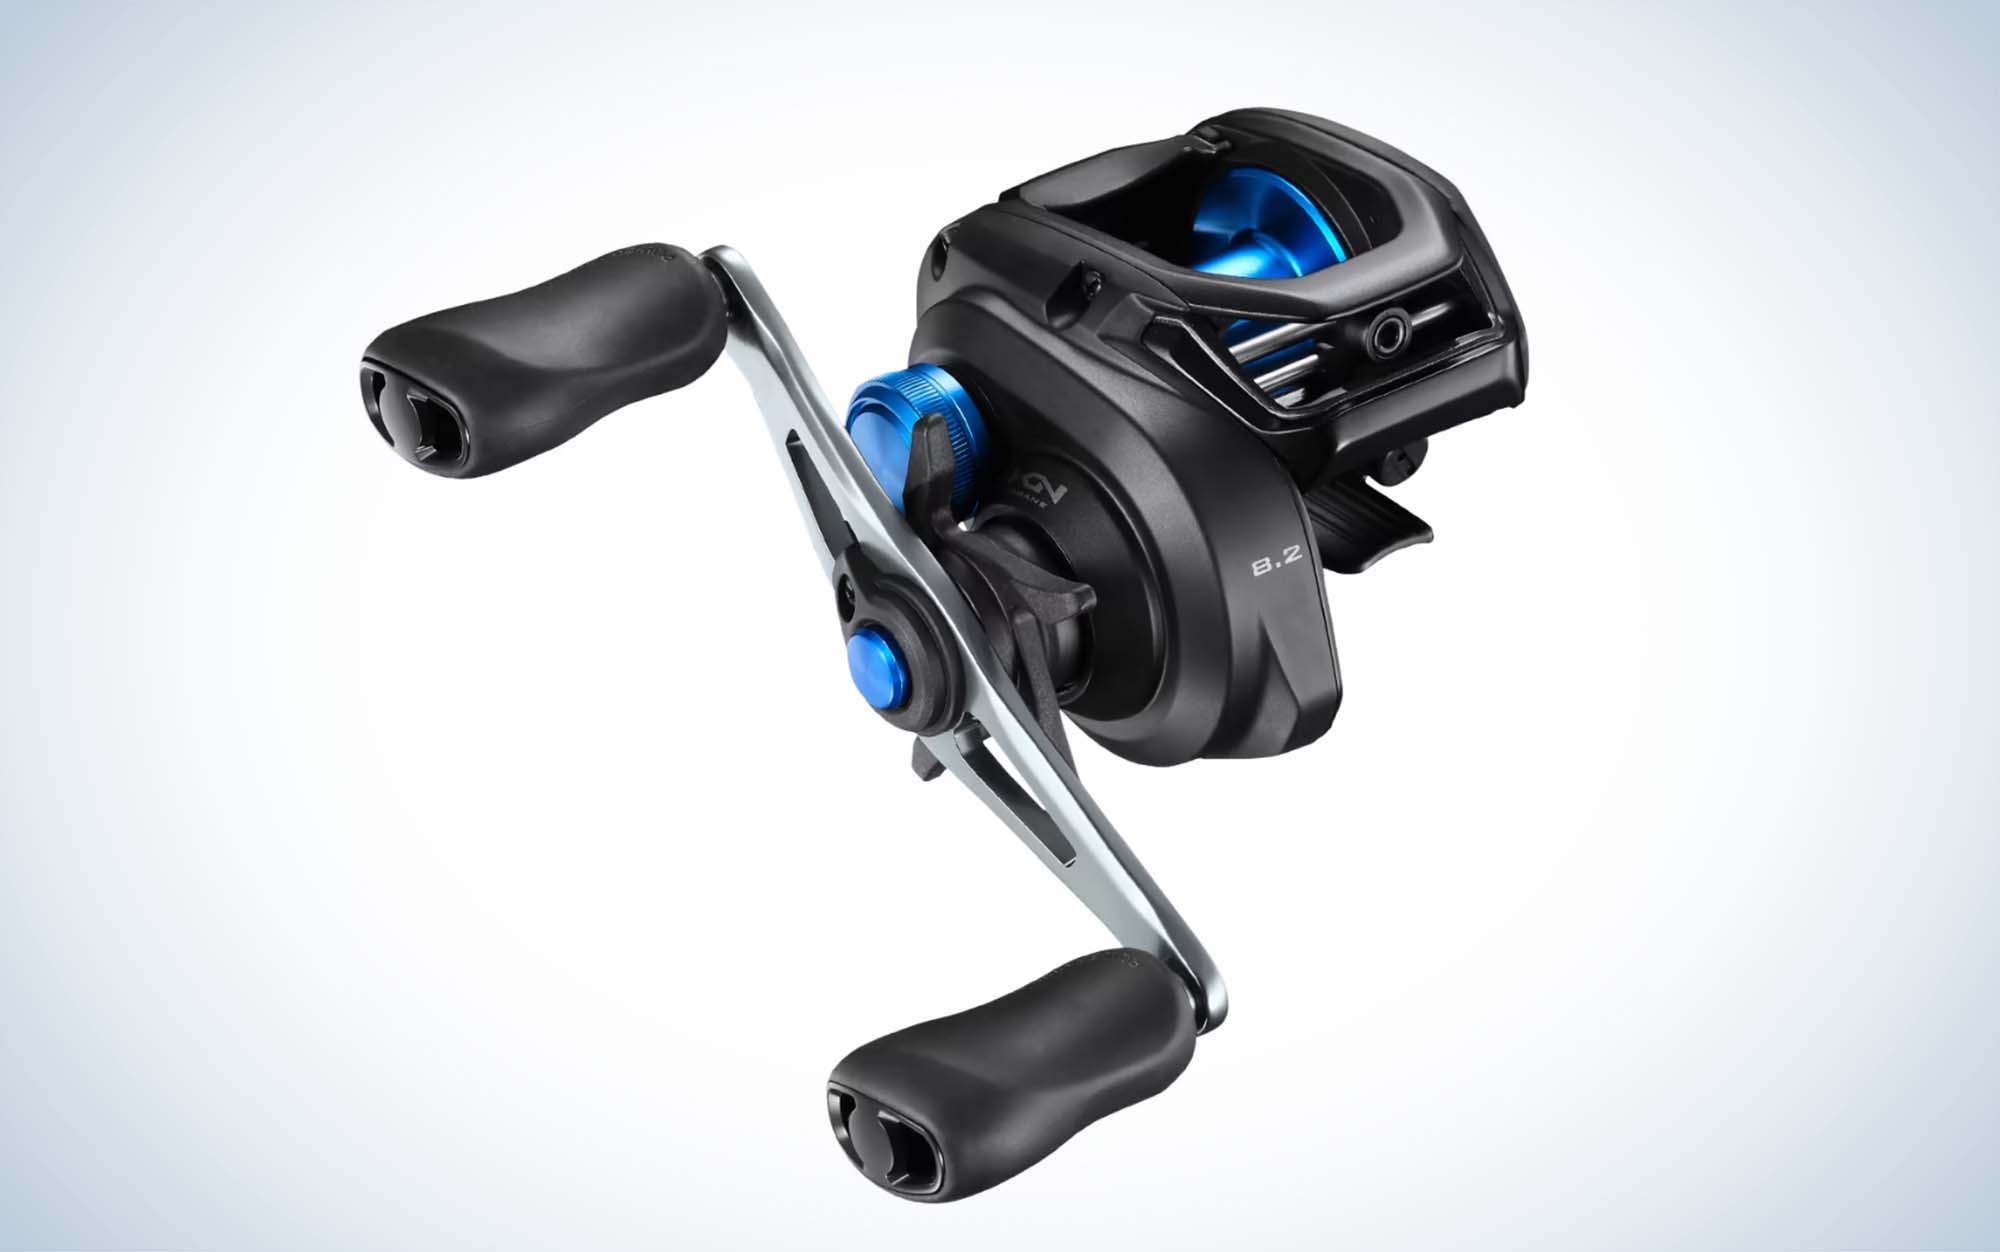 The Shimano SLX is one of the best baitcasters under $100